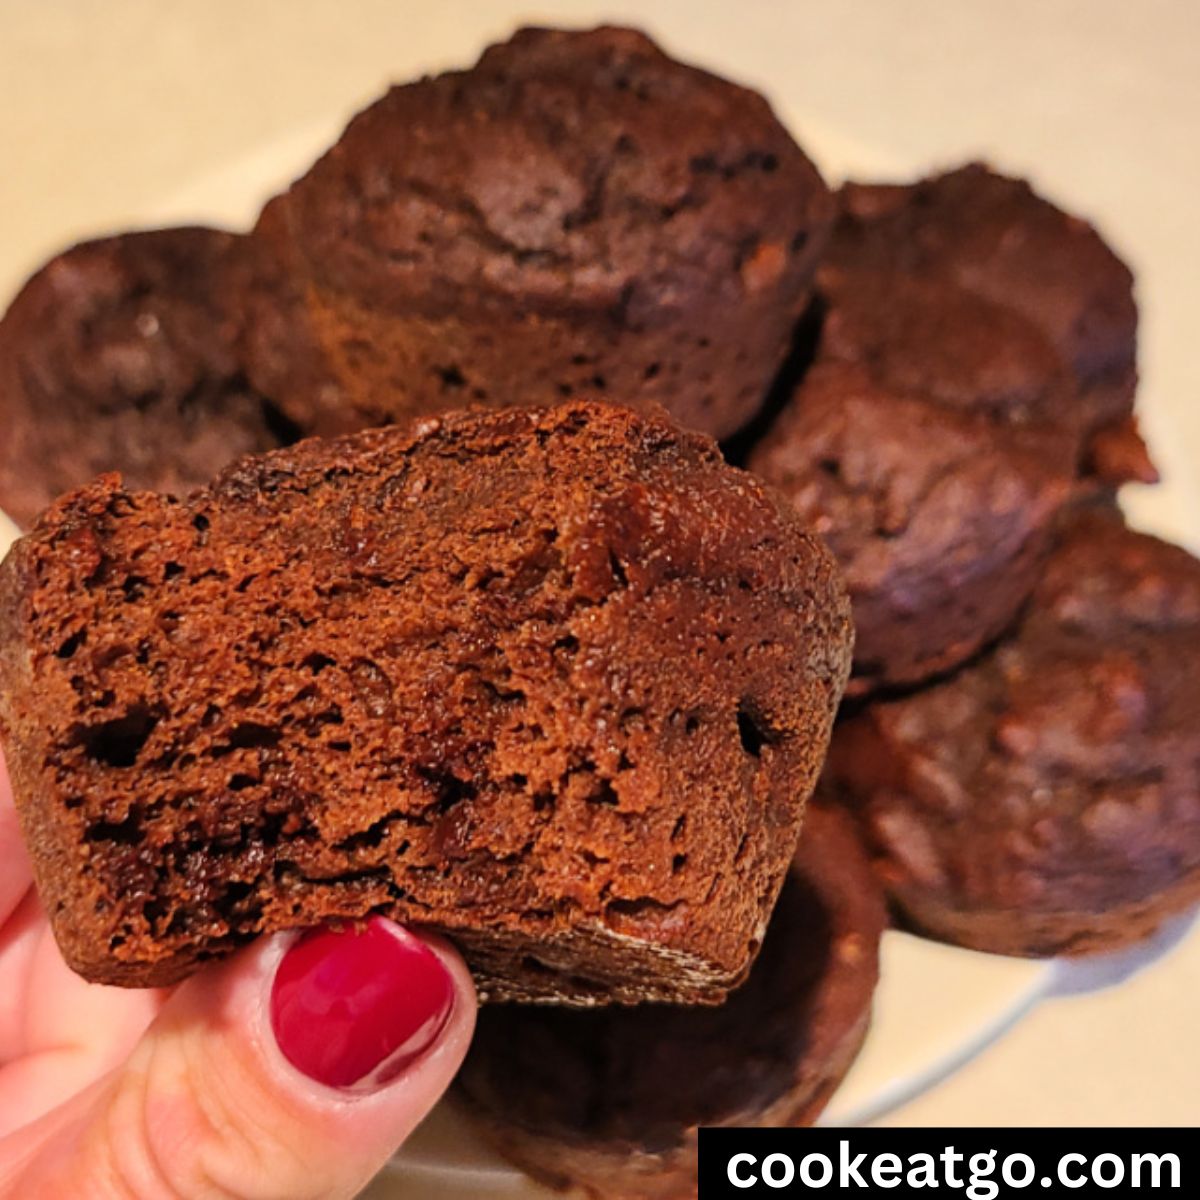 Weight Watchers Kodiak Chocolate Muffin bite into with a pile of muffins behind it